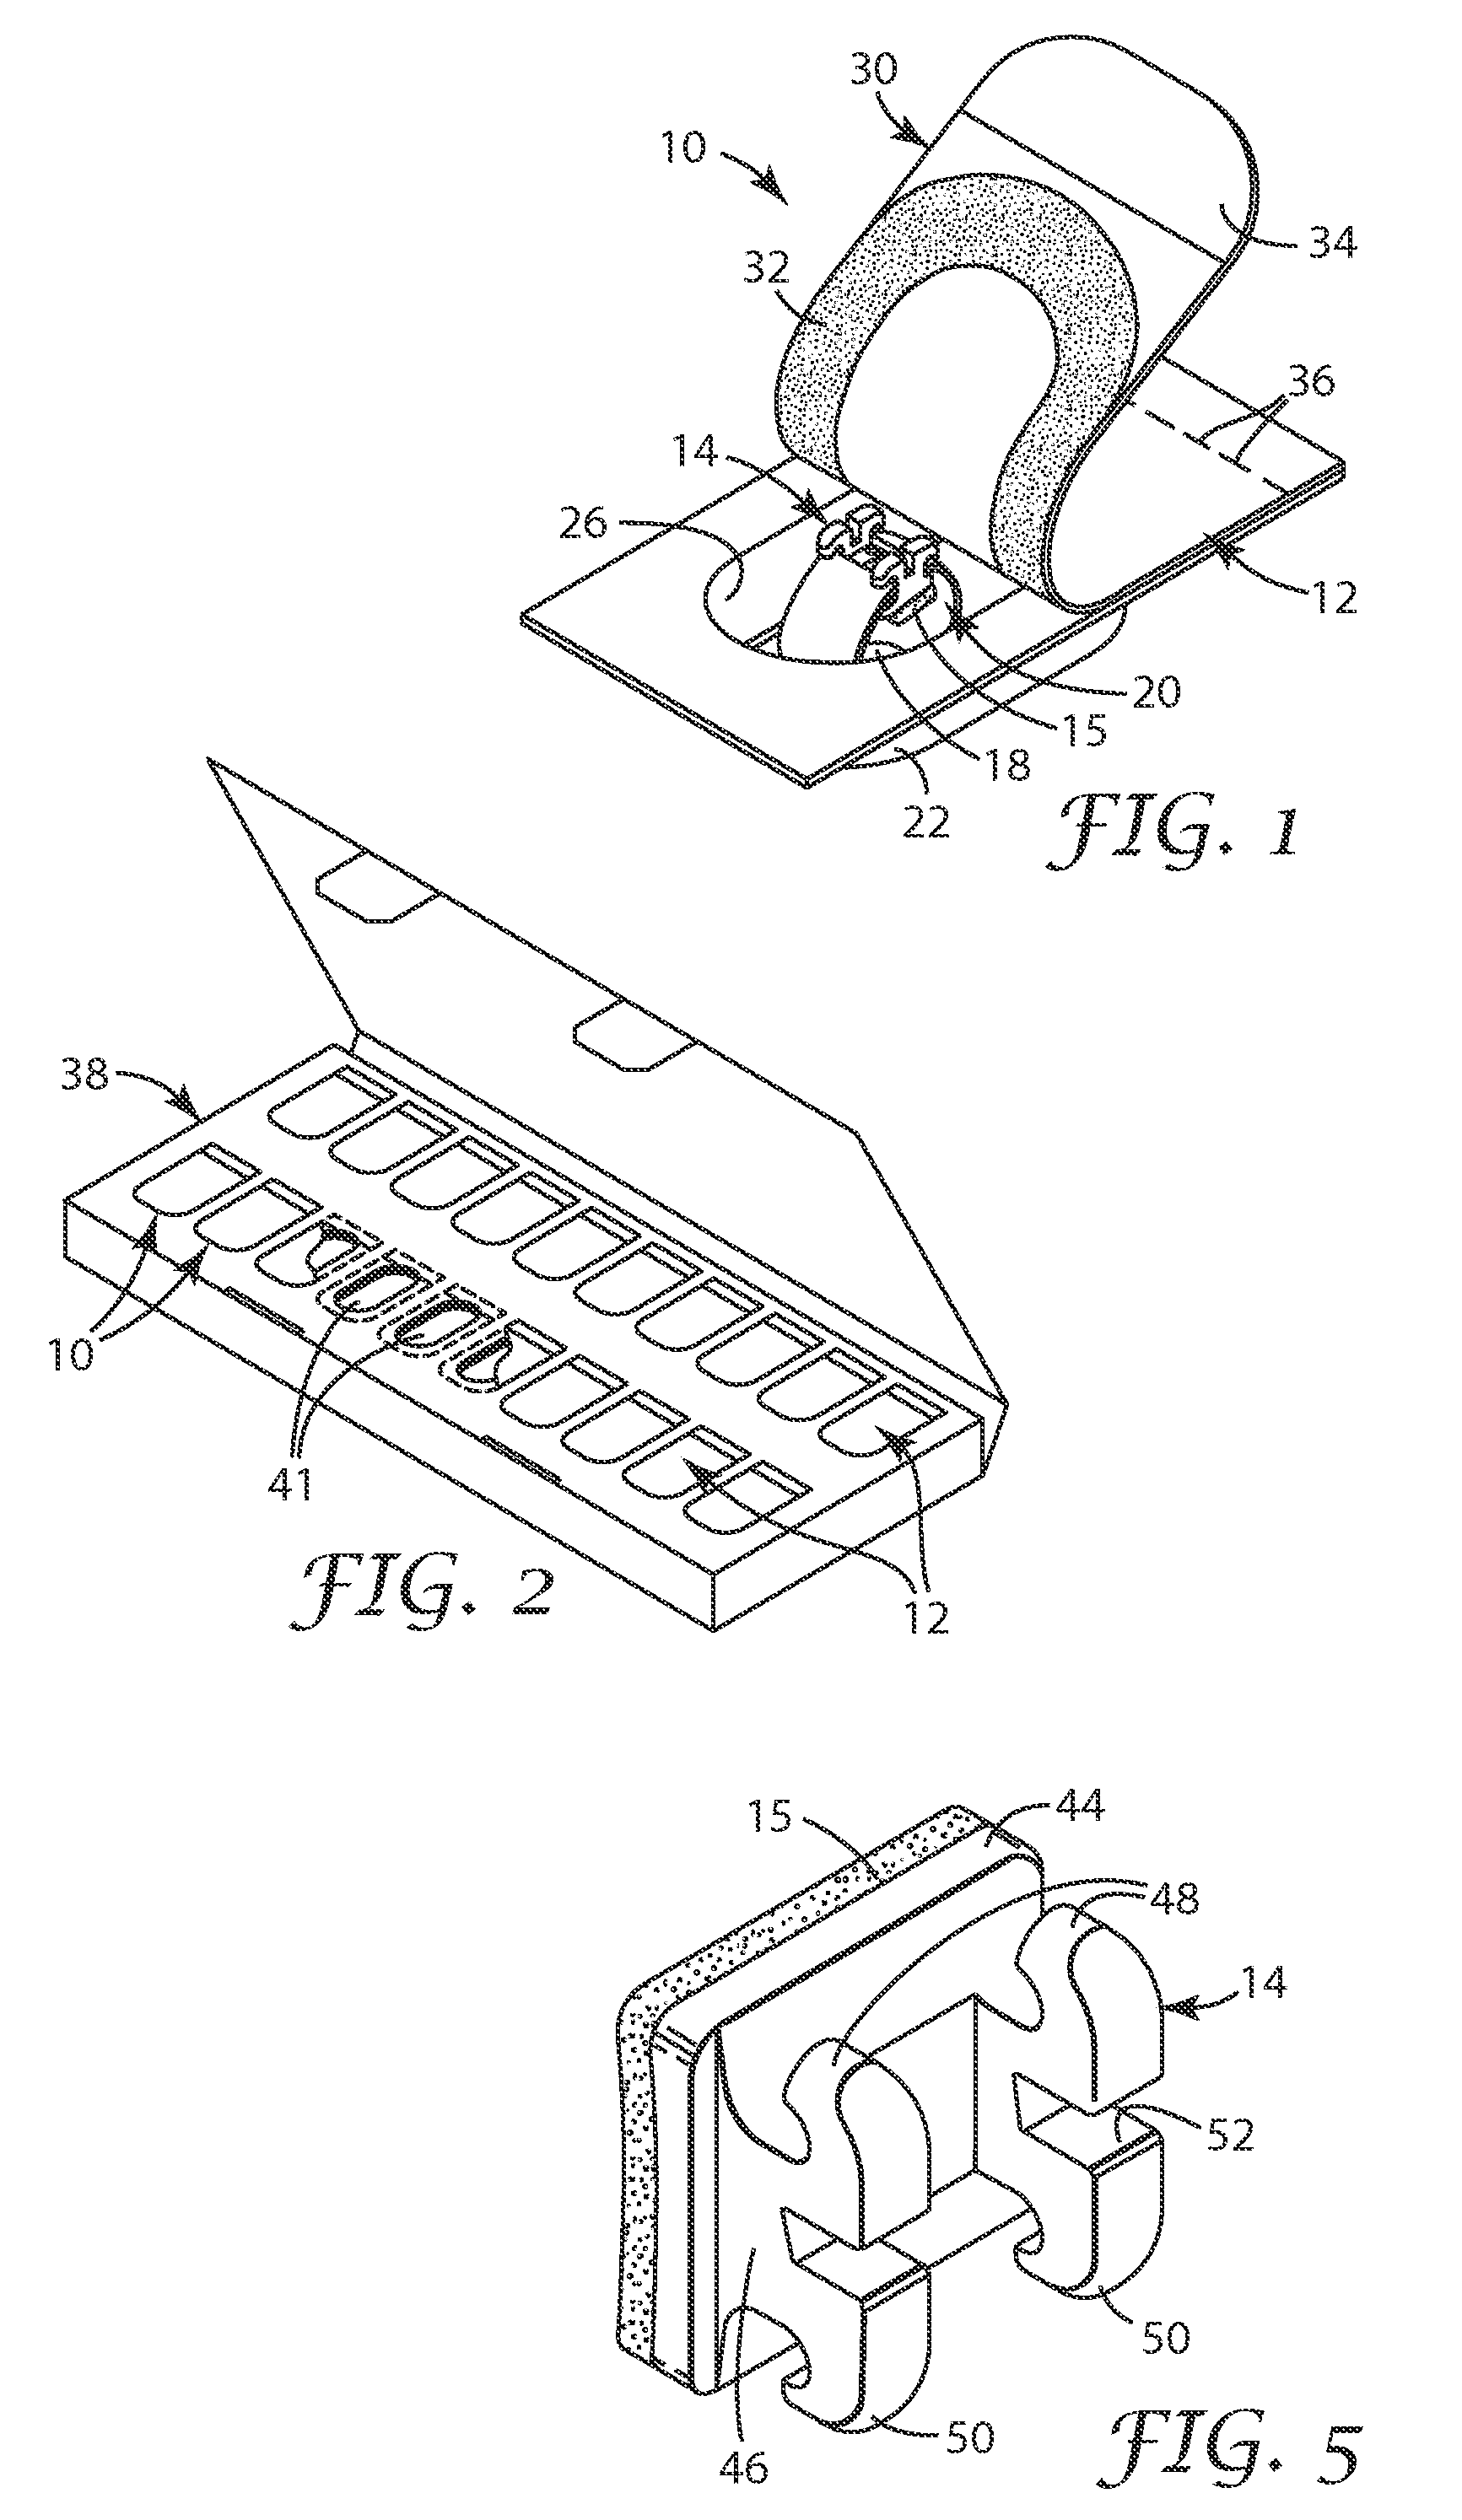 Packaged orthodontic appliance and adhesive material